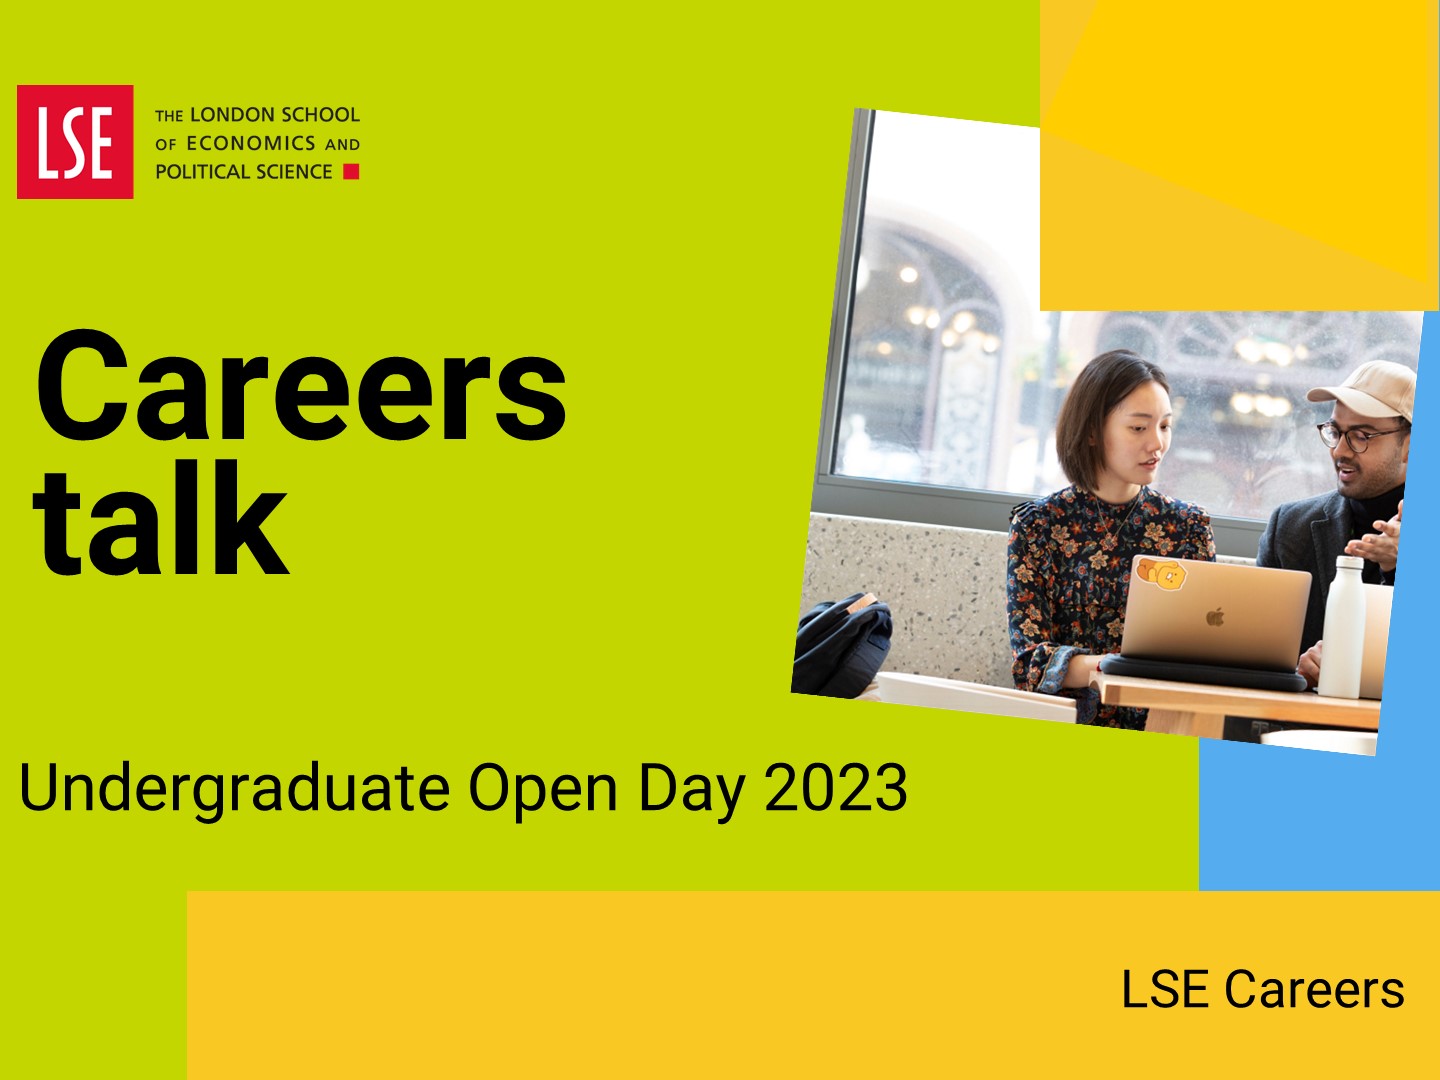 LSE Careers provide an overview of the support and services available to LSE students